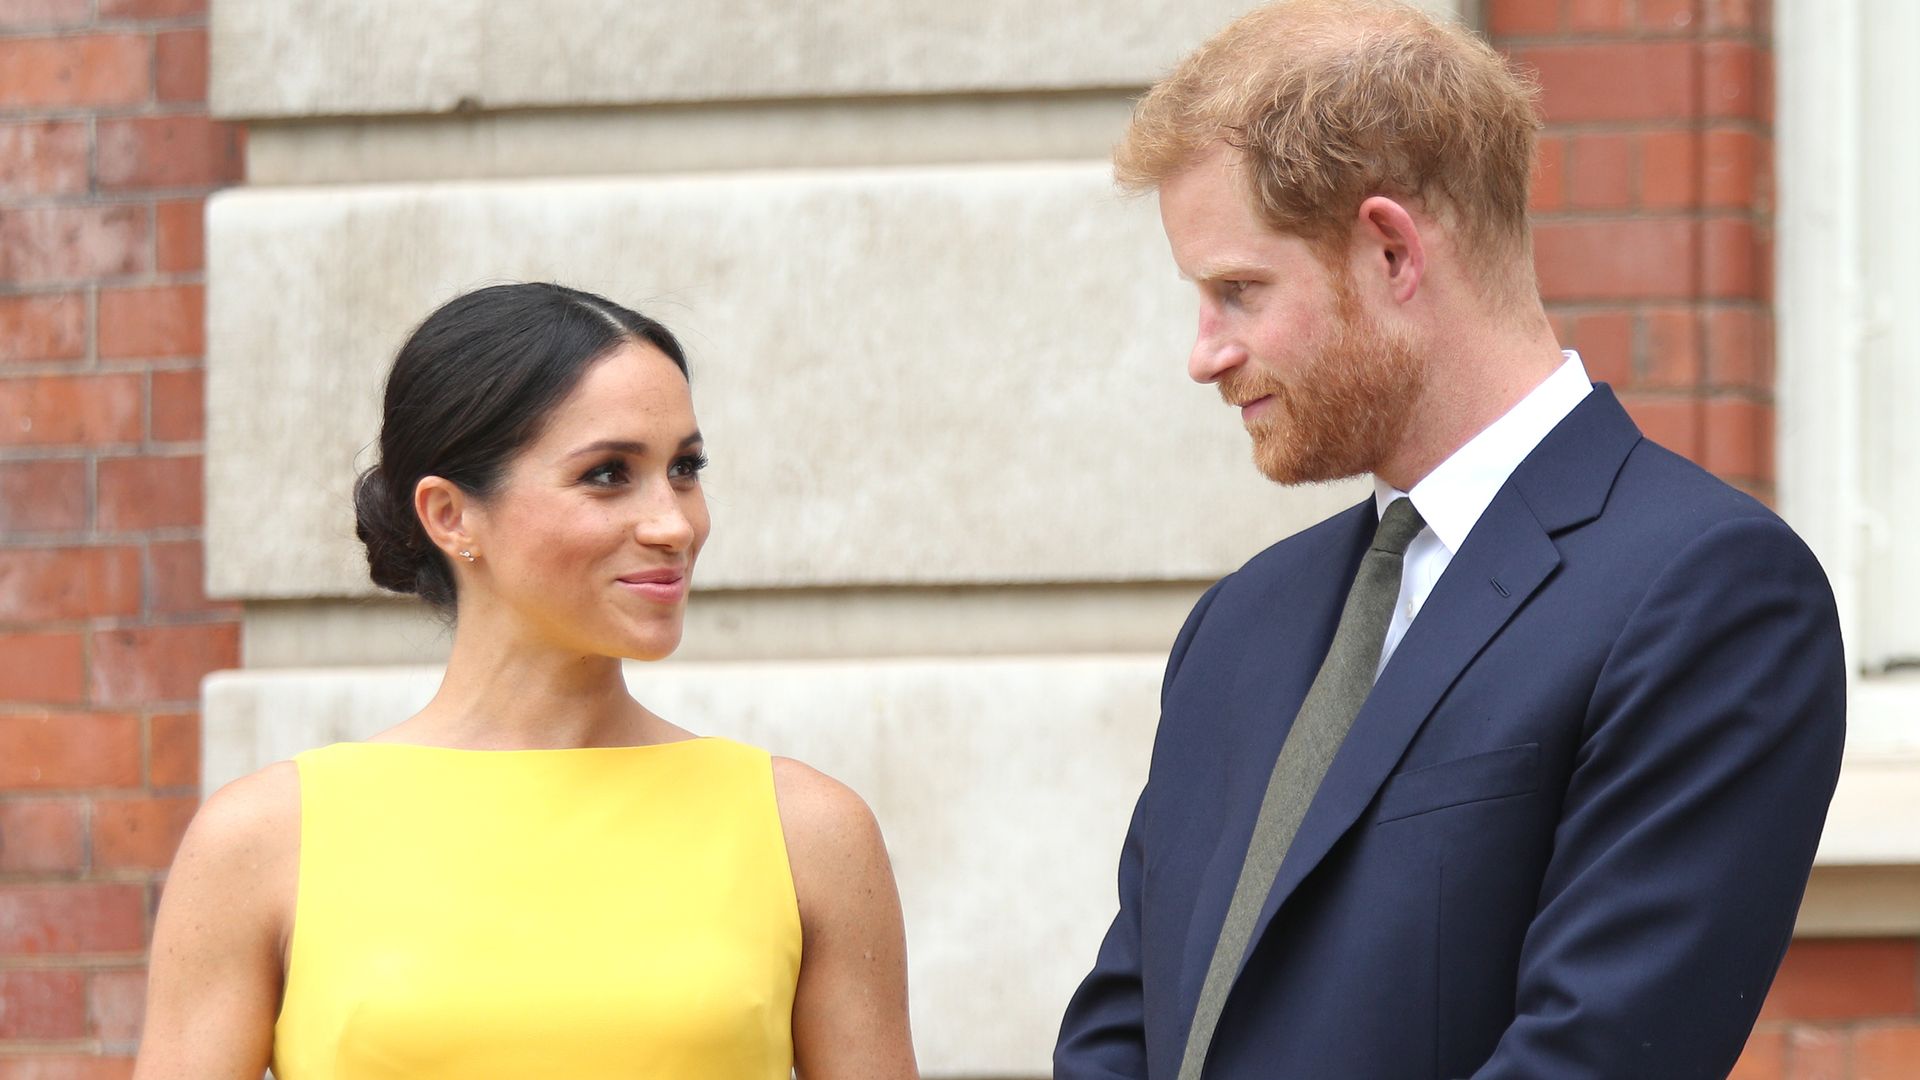 Meghan Markle in a yellow dress with Prince Harry in a suit